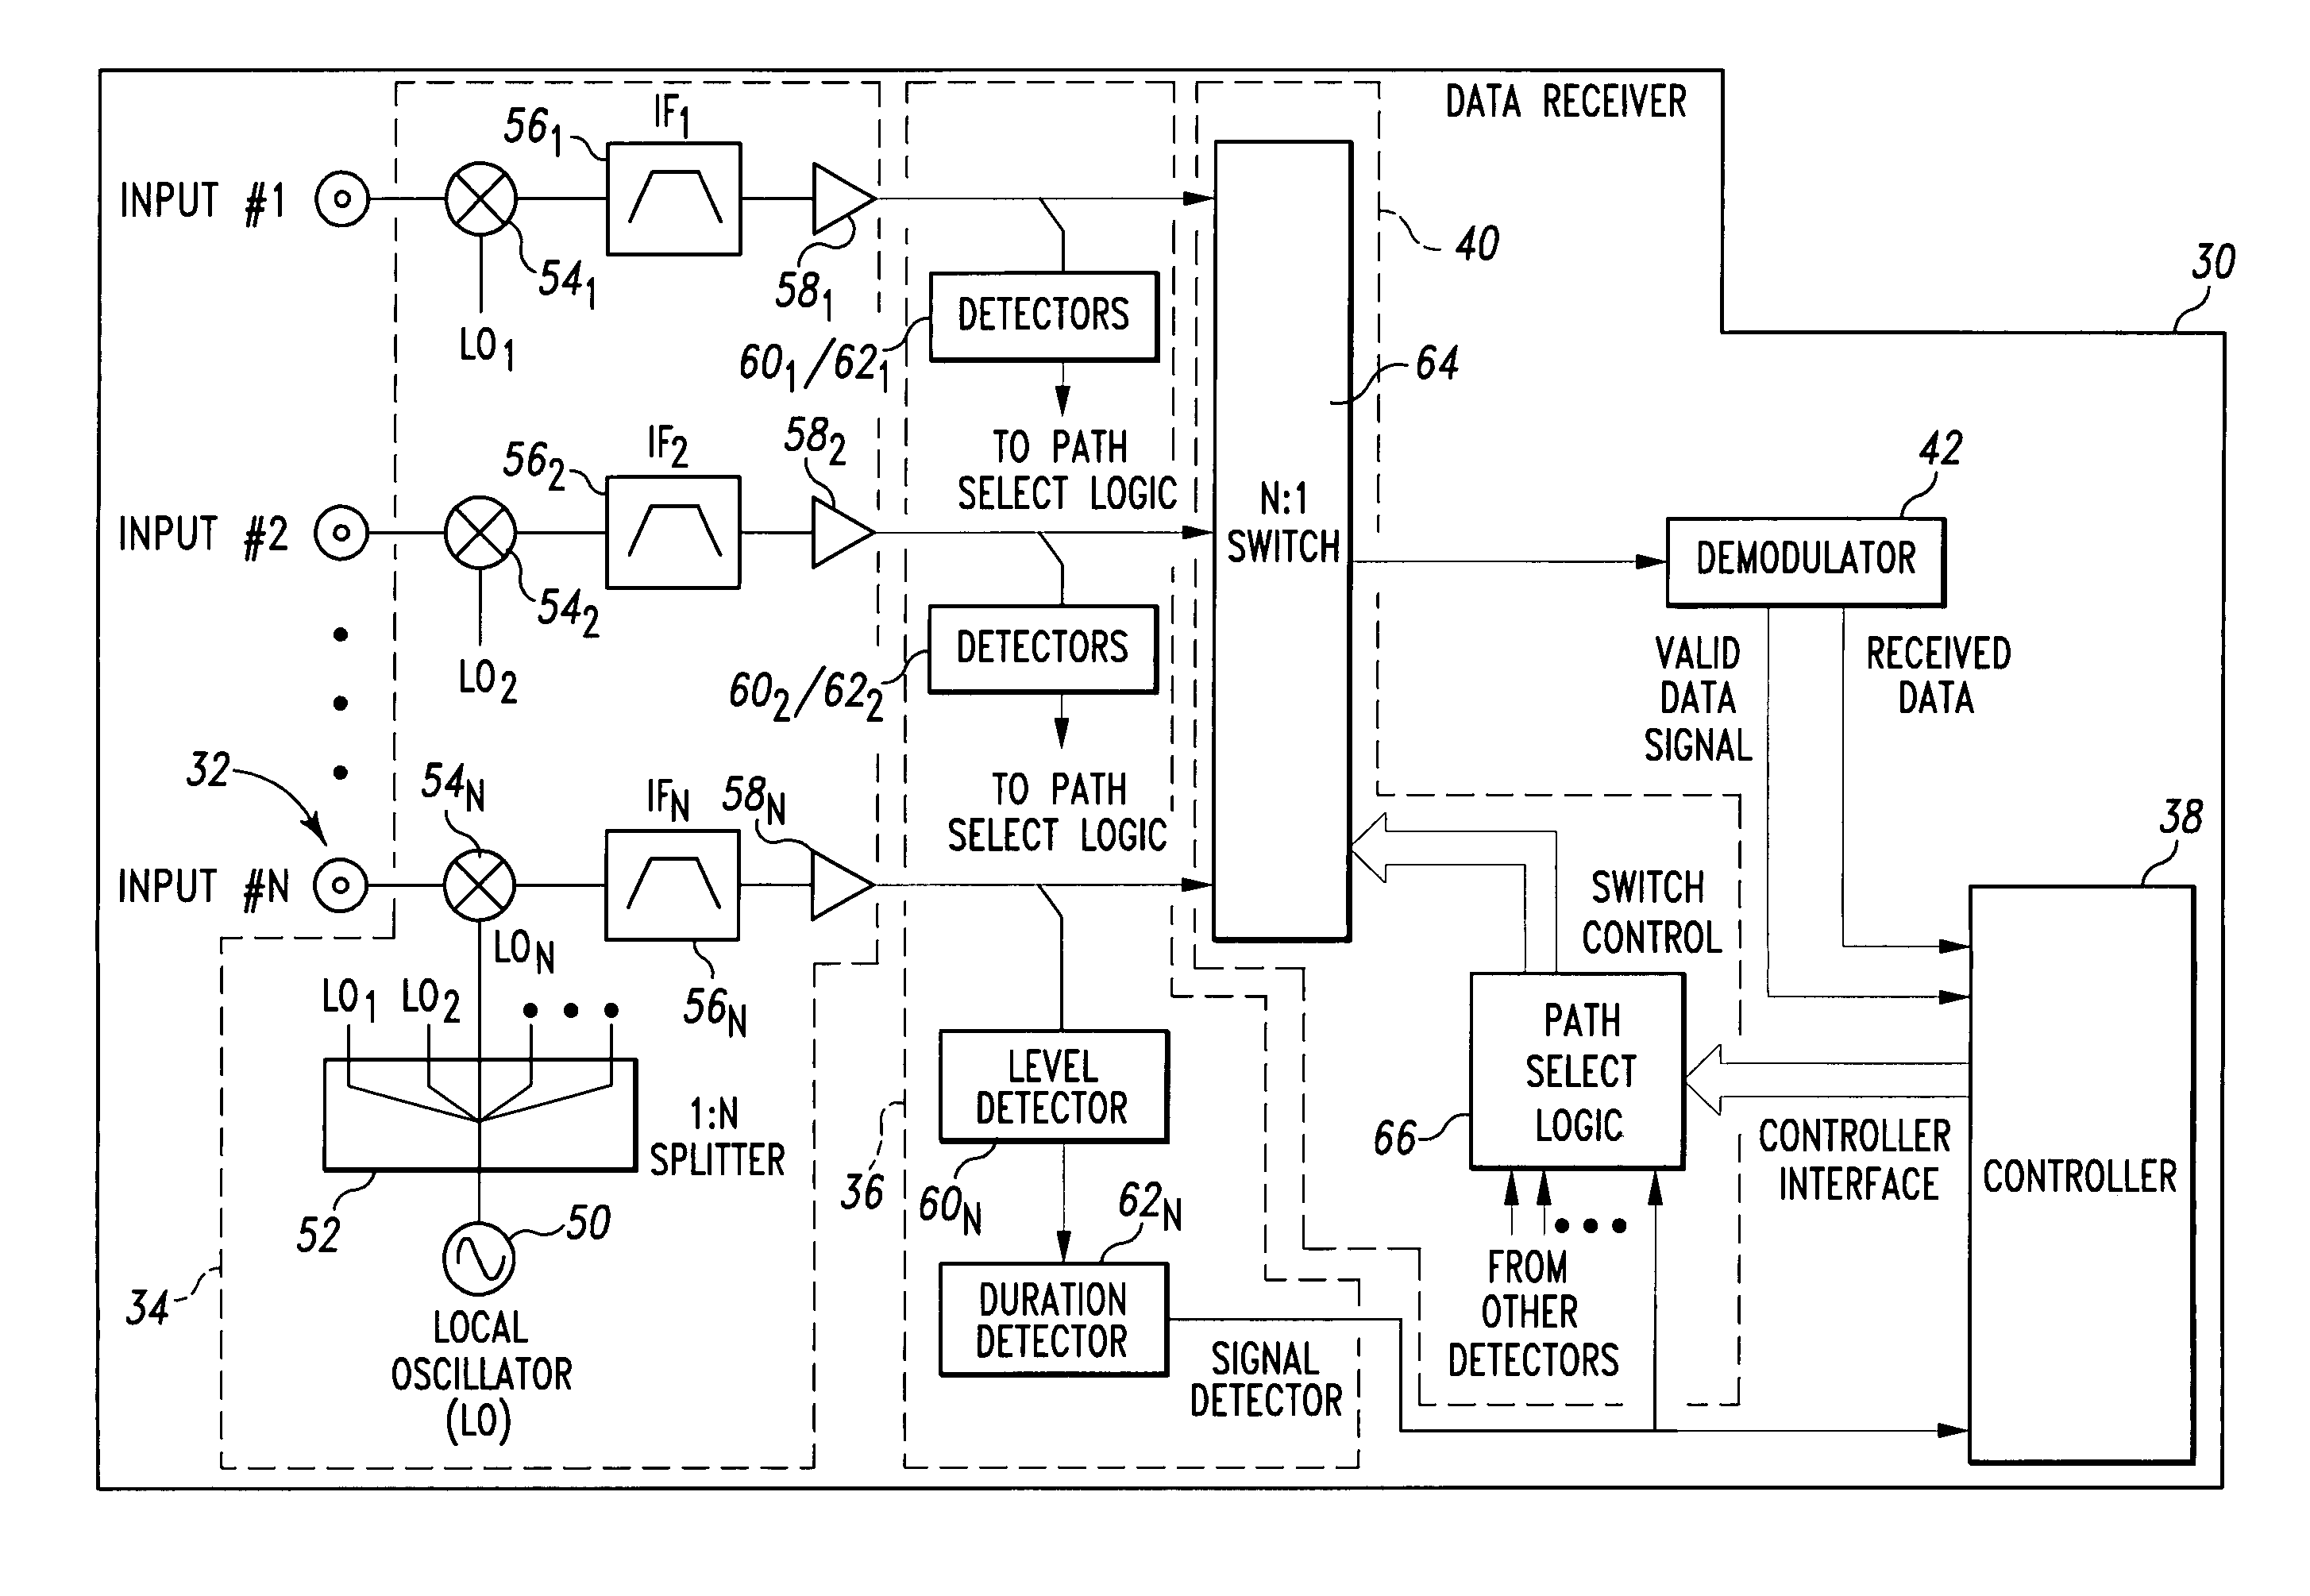 Multiple input data receiver for cable television systems